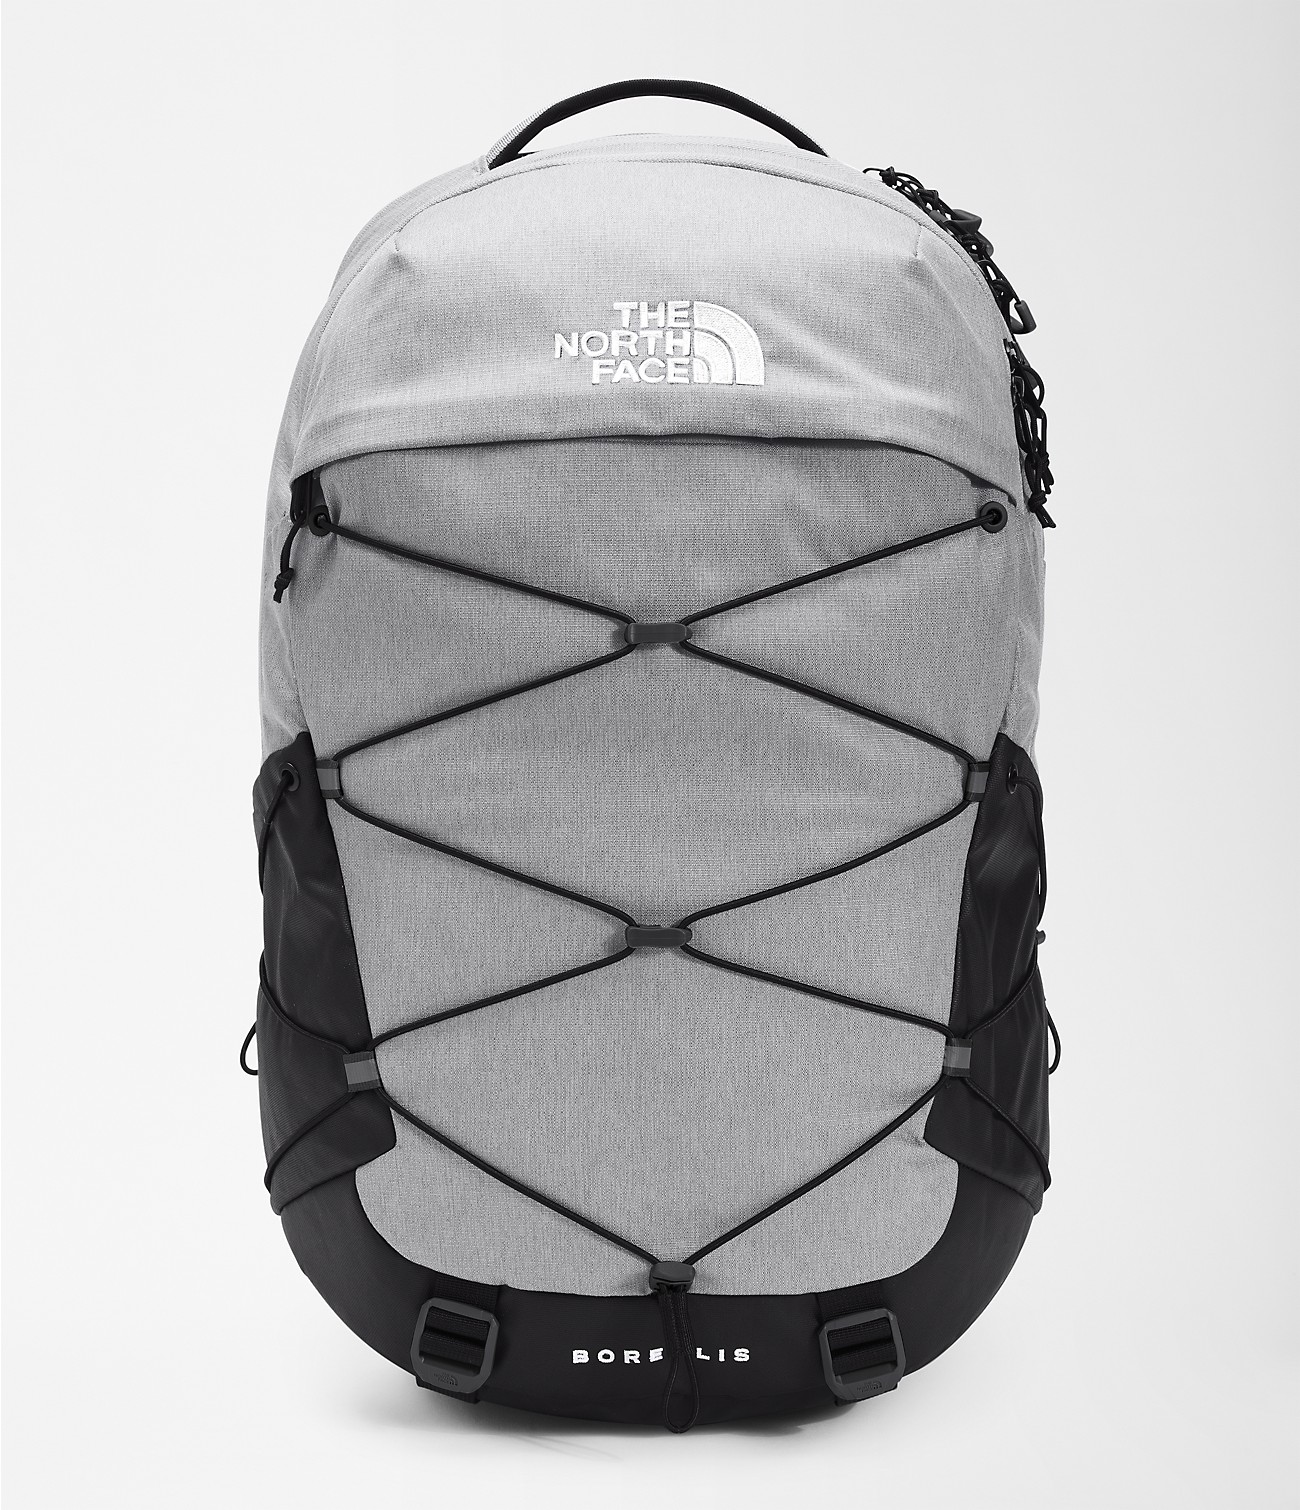 Unlock Wilderness' choice in the Dakine Vs North Face comparison, the Borealis Backpack by The North Face